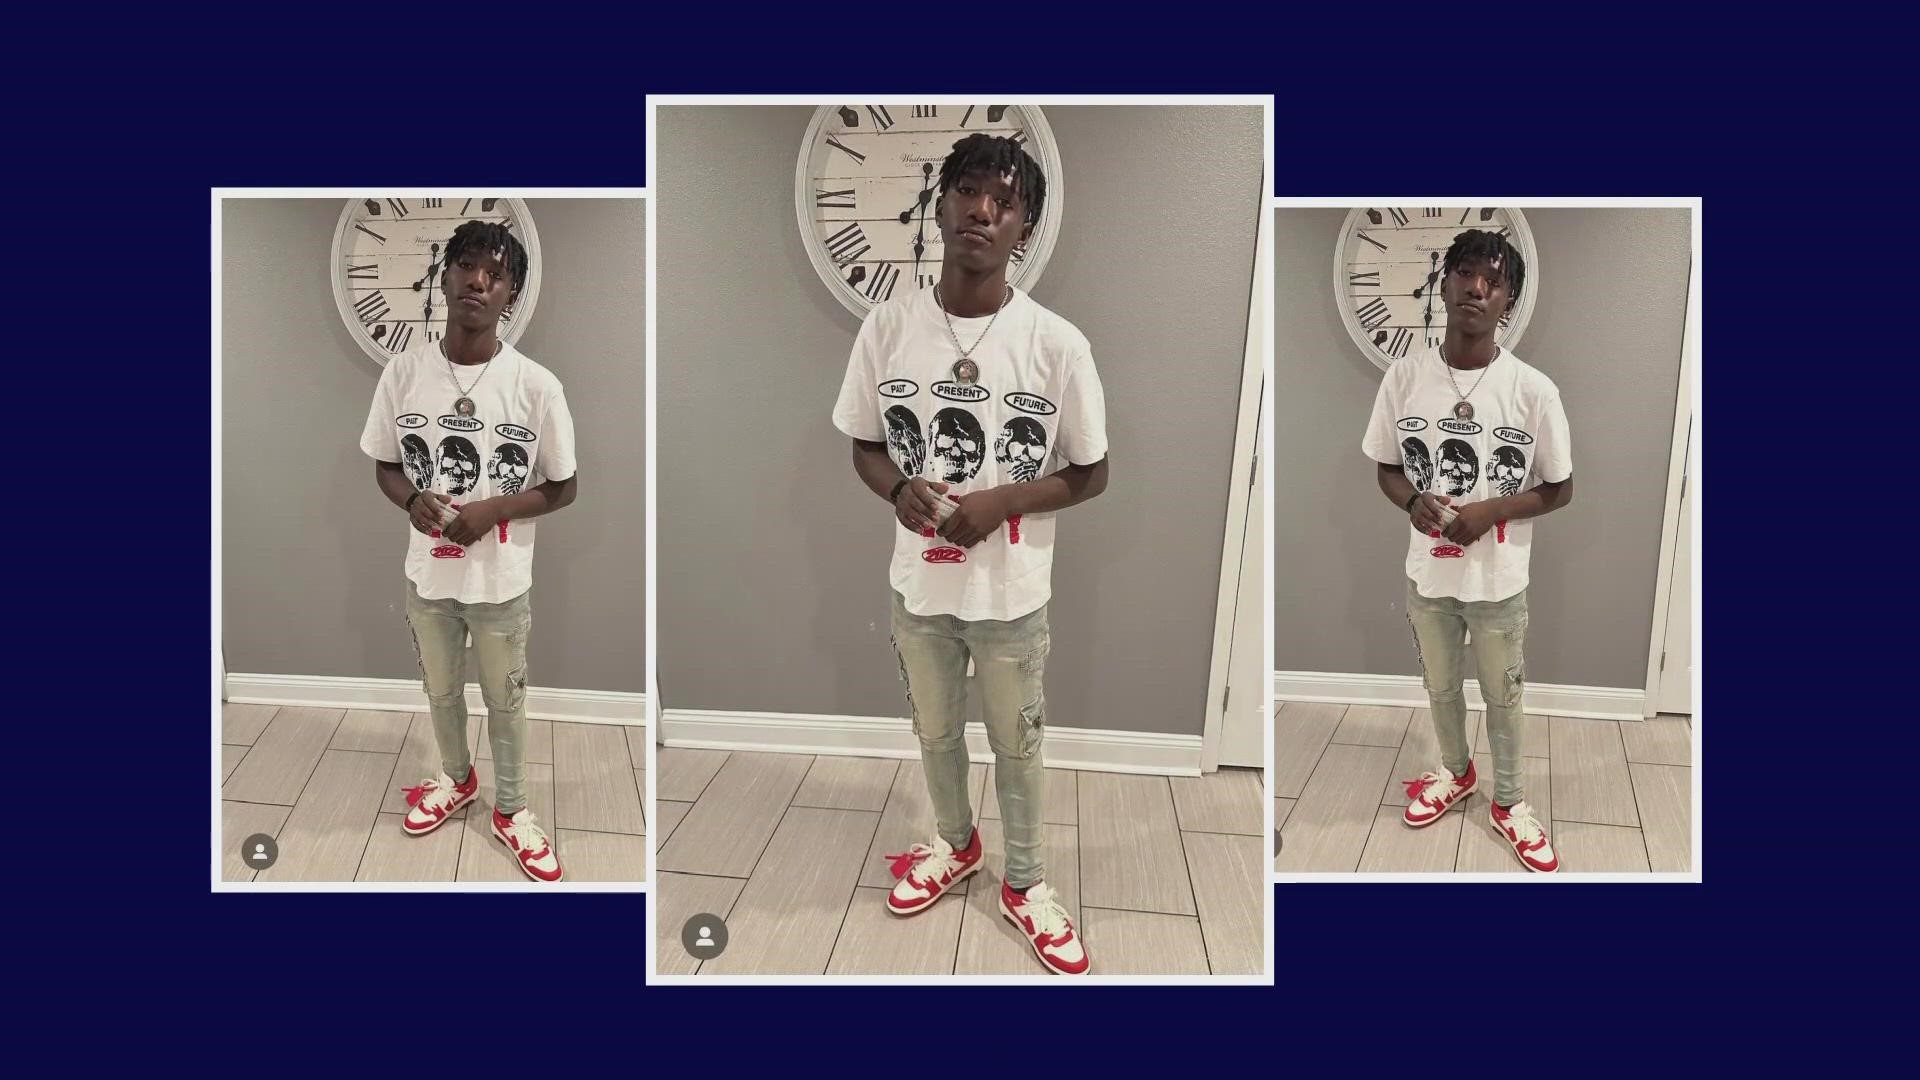 For the second time in 15 days, a Warren Easton student has been lost to gunfire. This time it's 15-year-old Tyler Ellis, who was on the school honor roll.